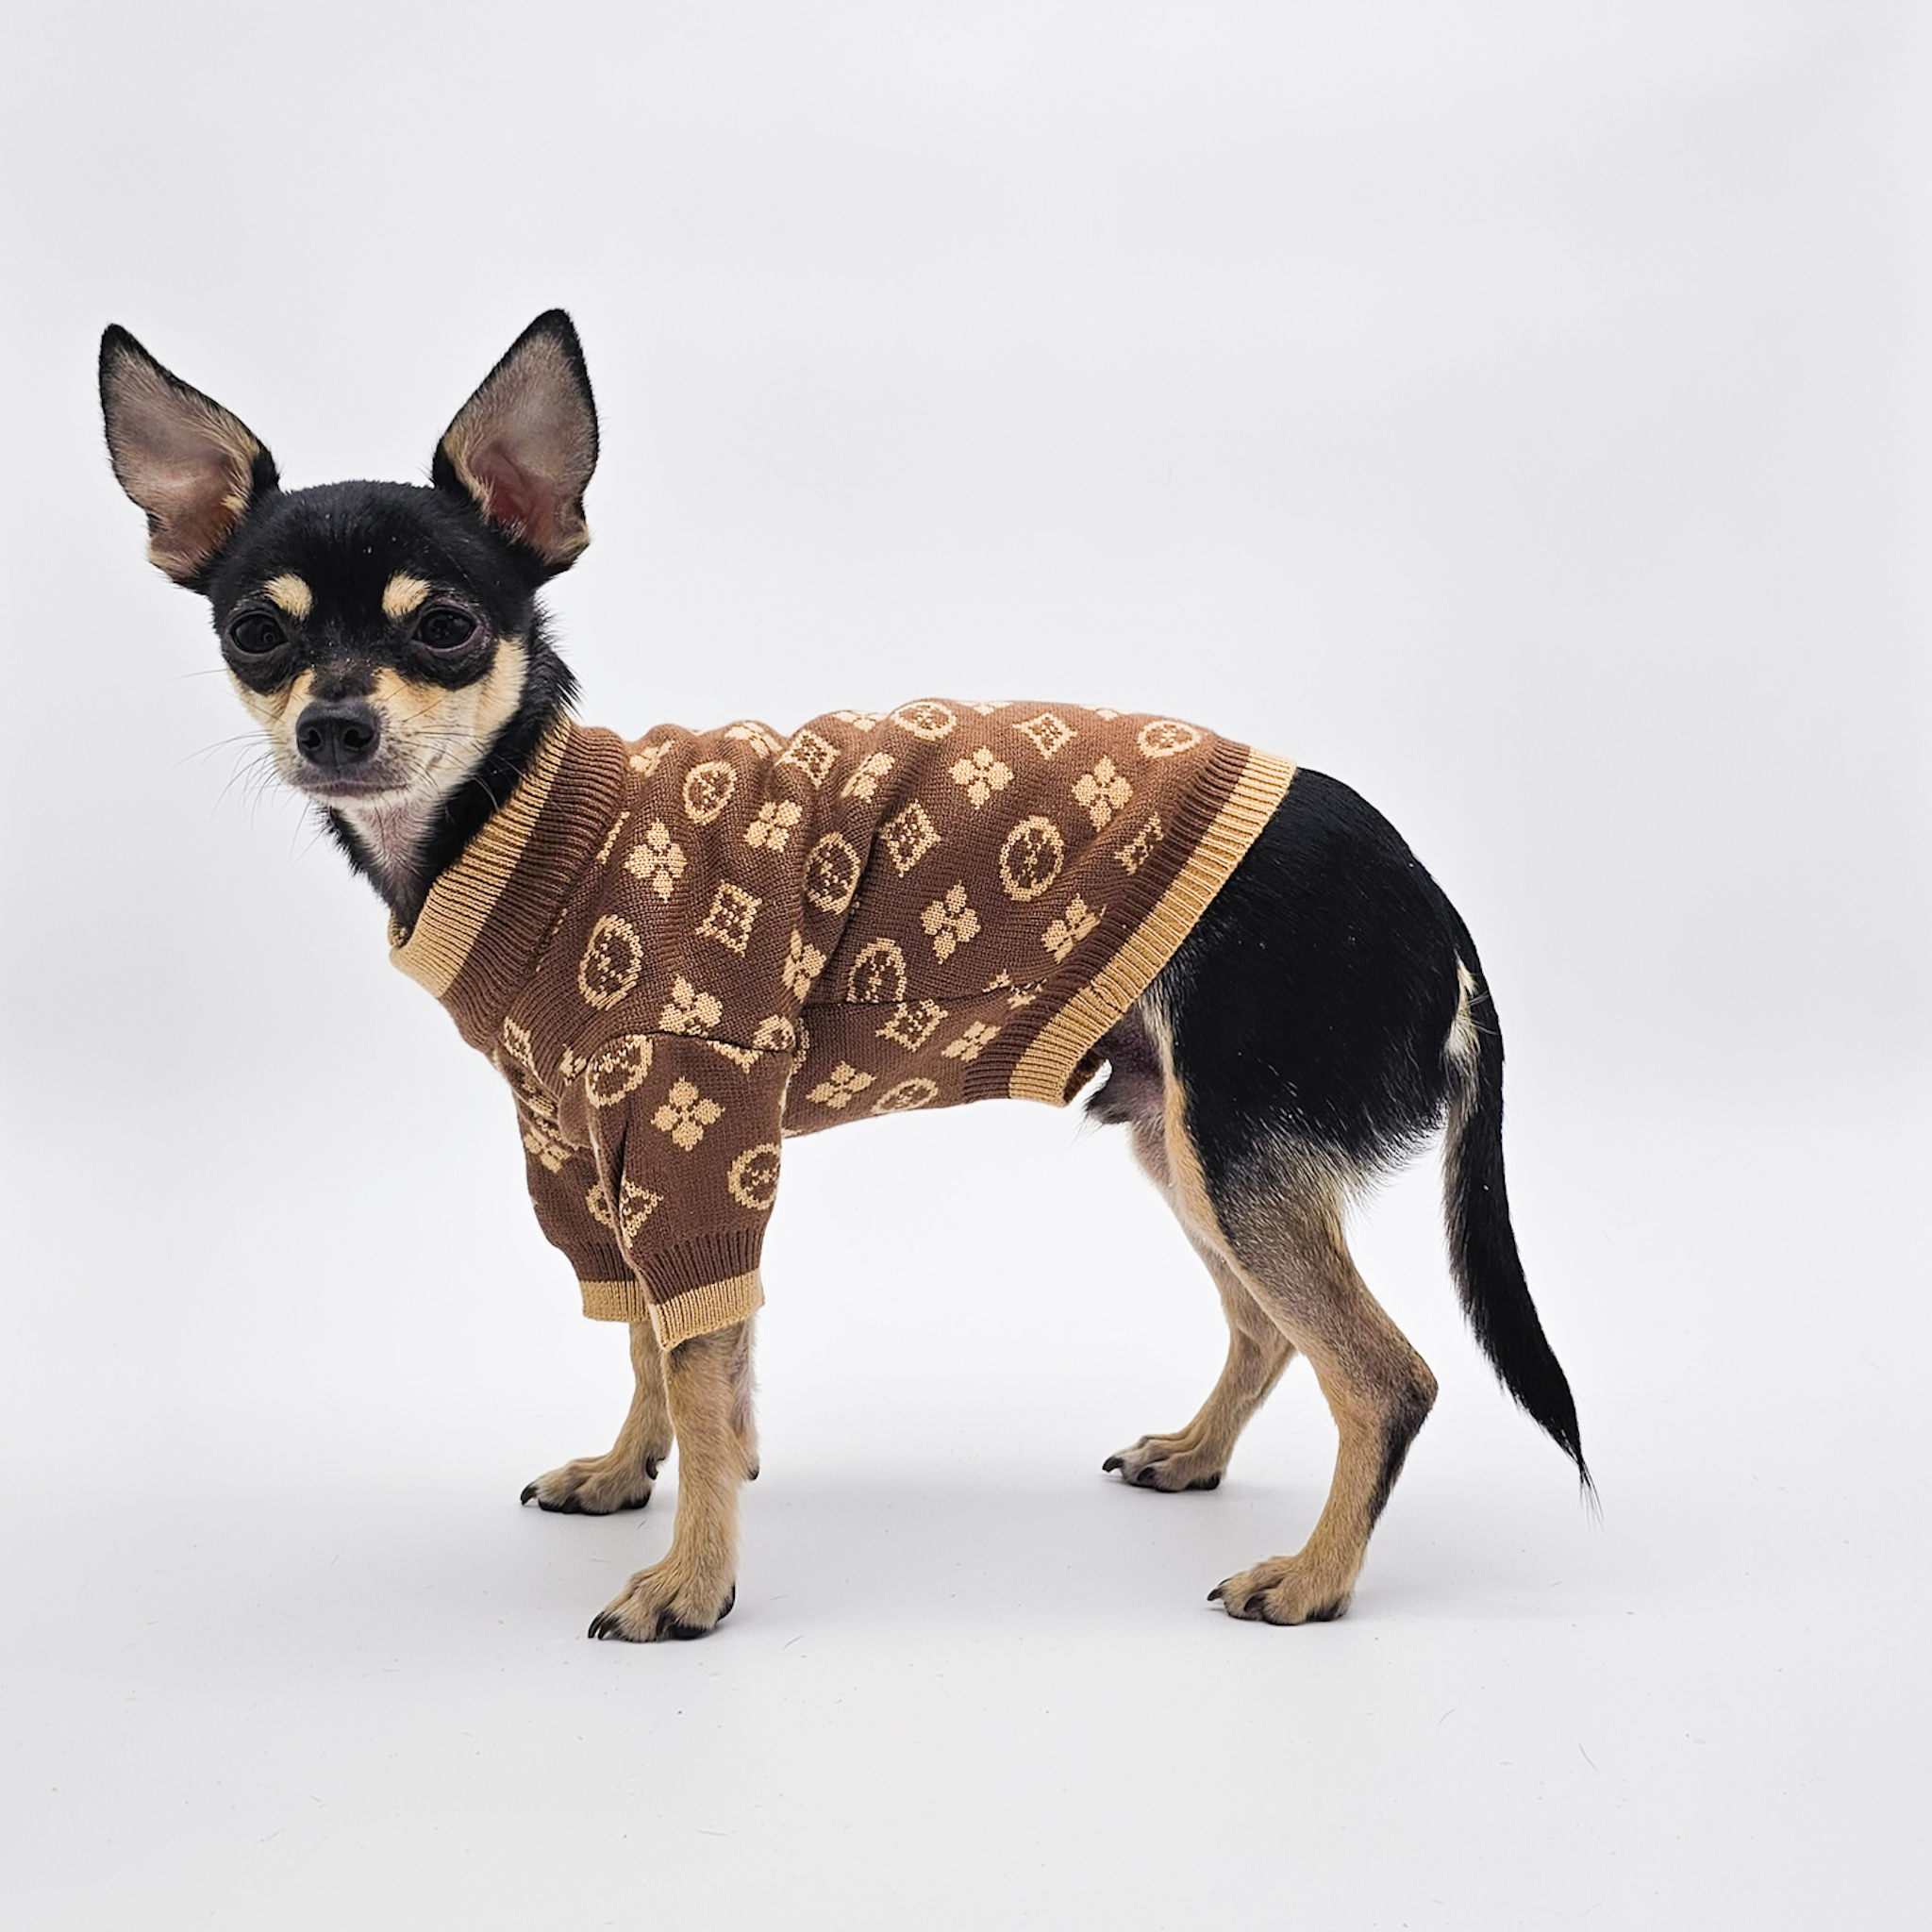 Elevate your pup's style with The Chi Society's Louis Vuitton inspired dog sweater